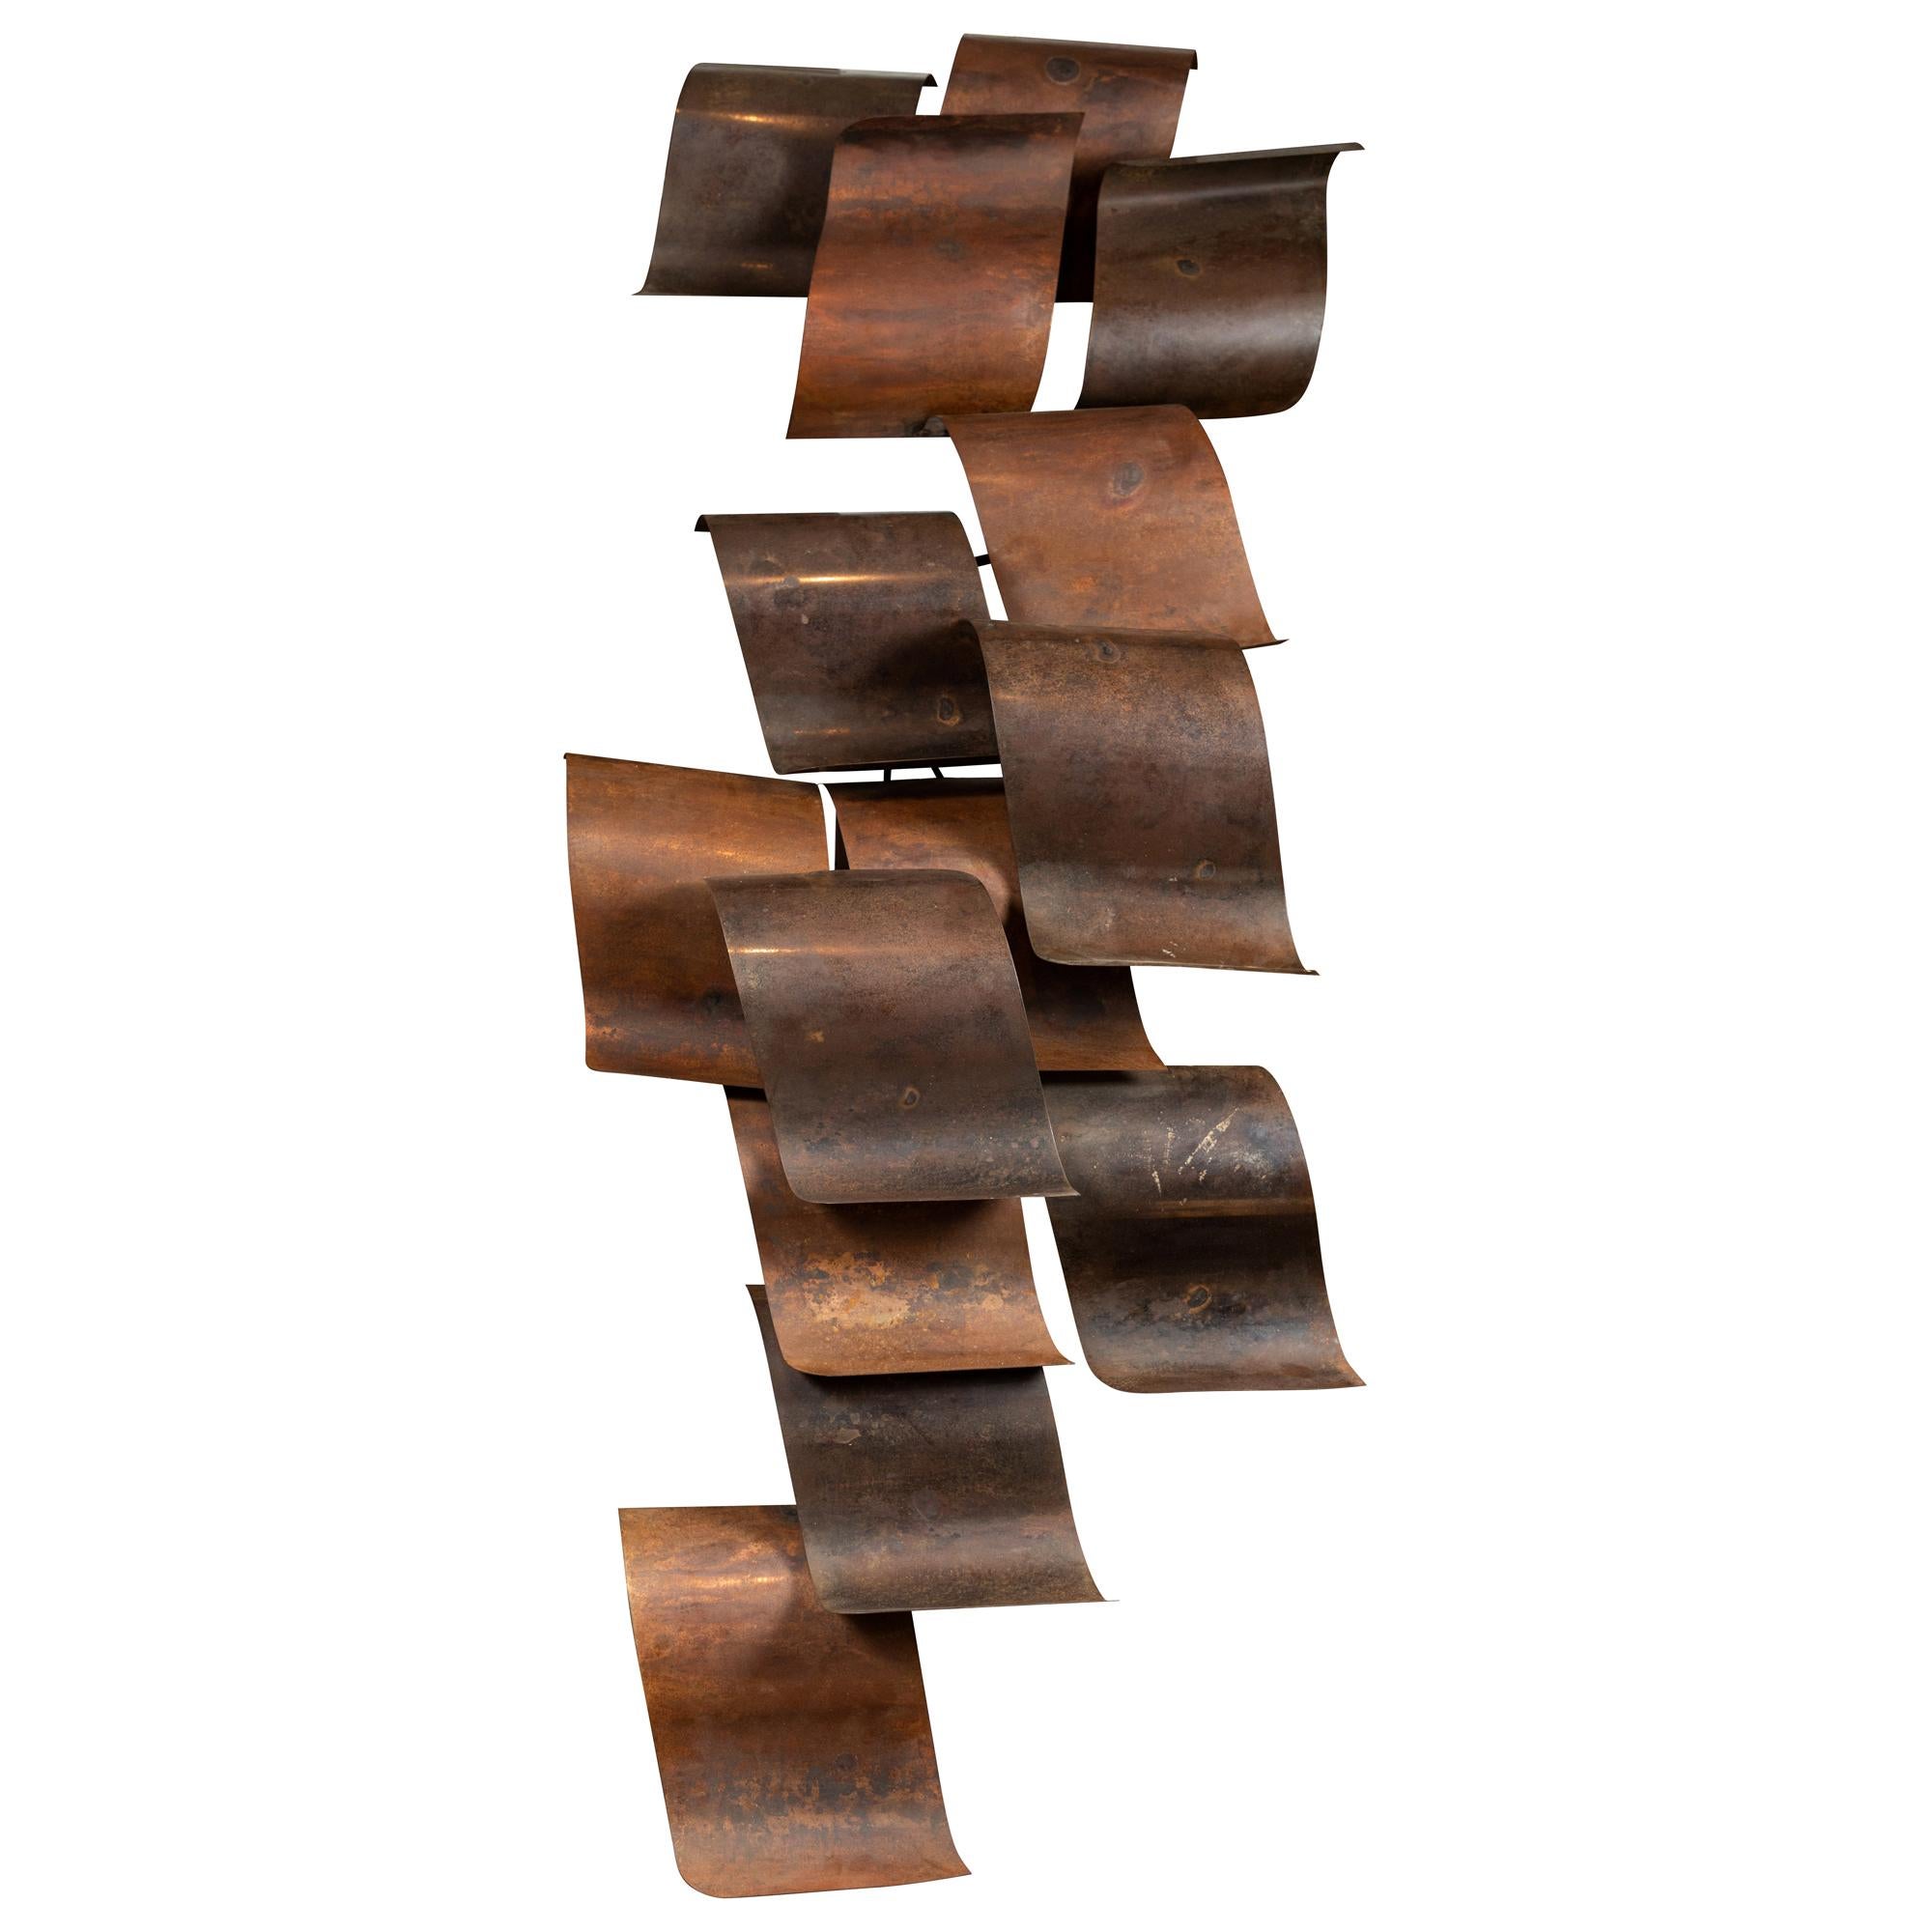 Enormous, Vintage, Abstract Wall Sculpture